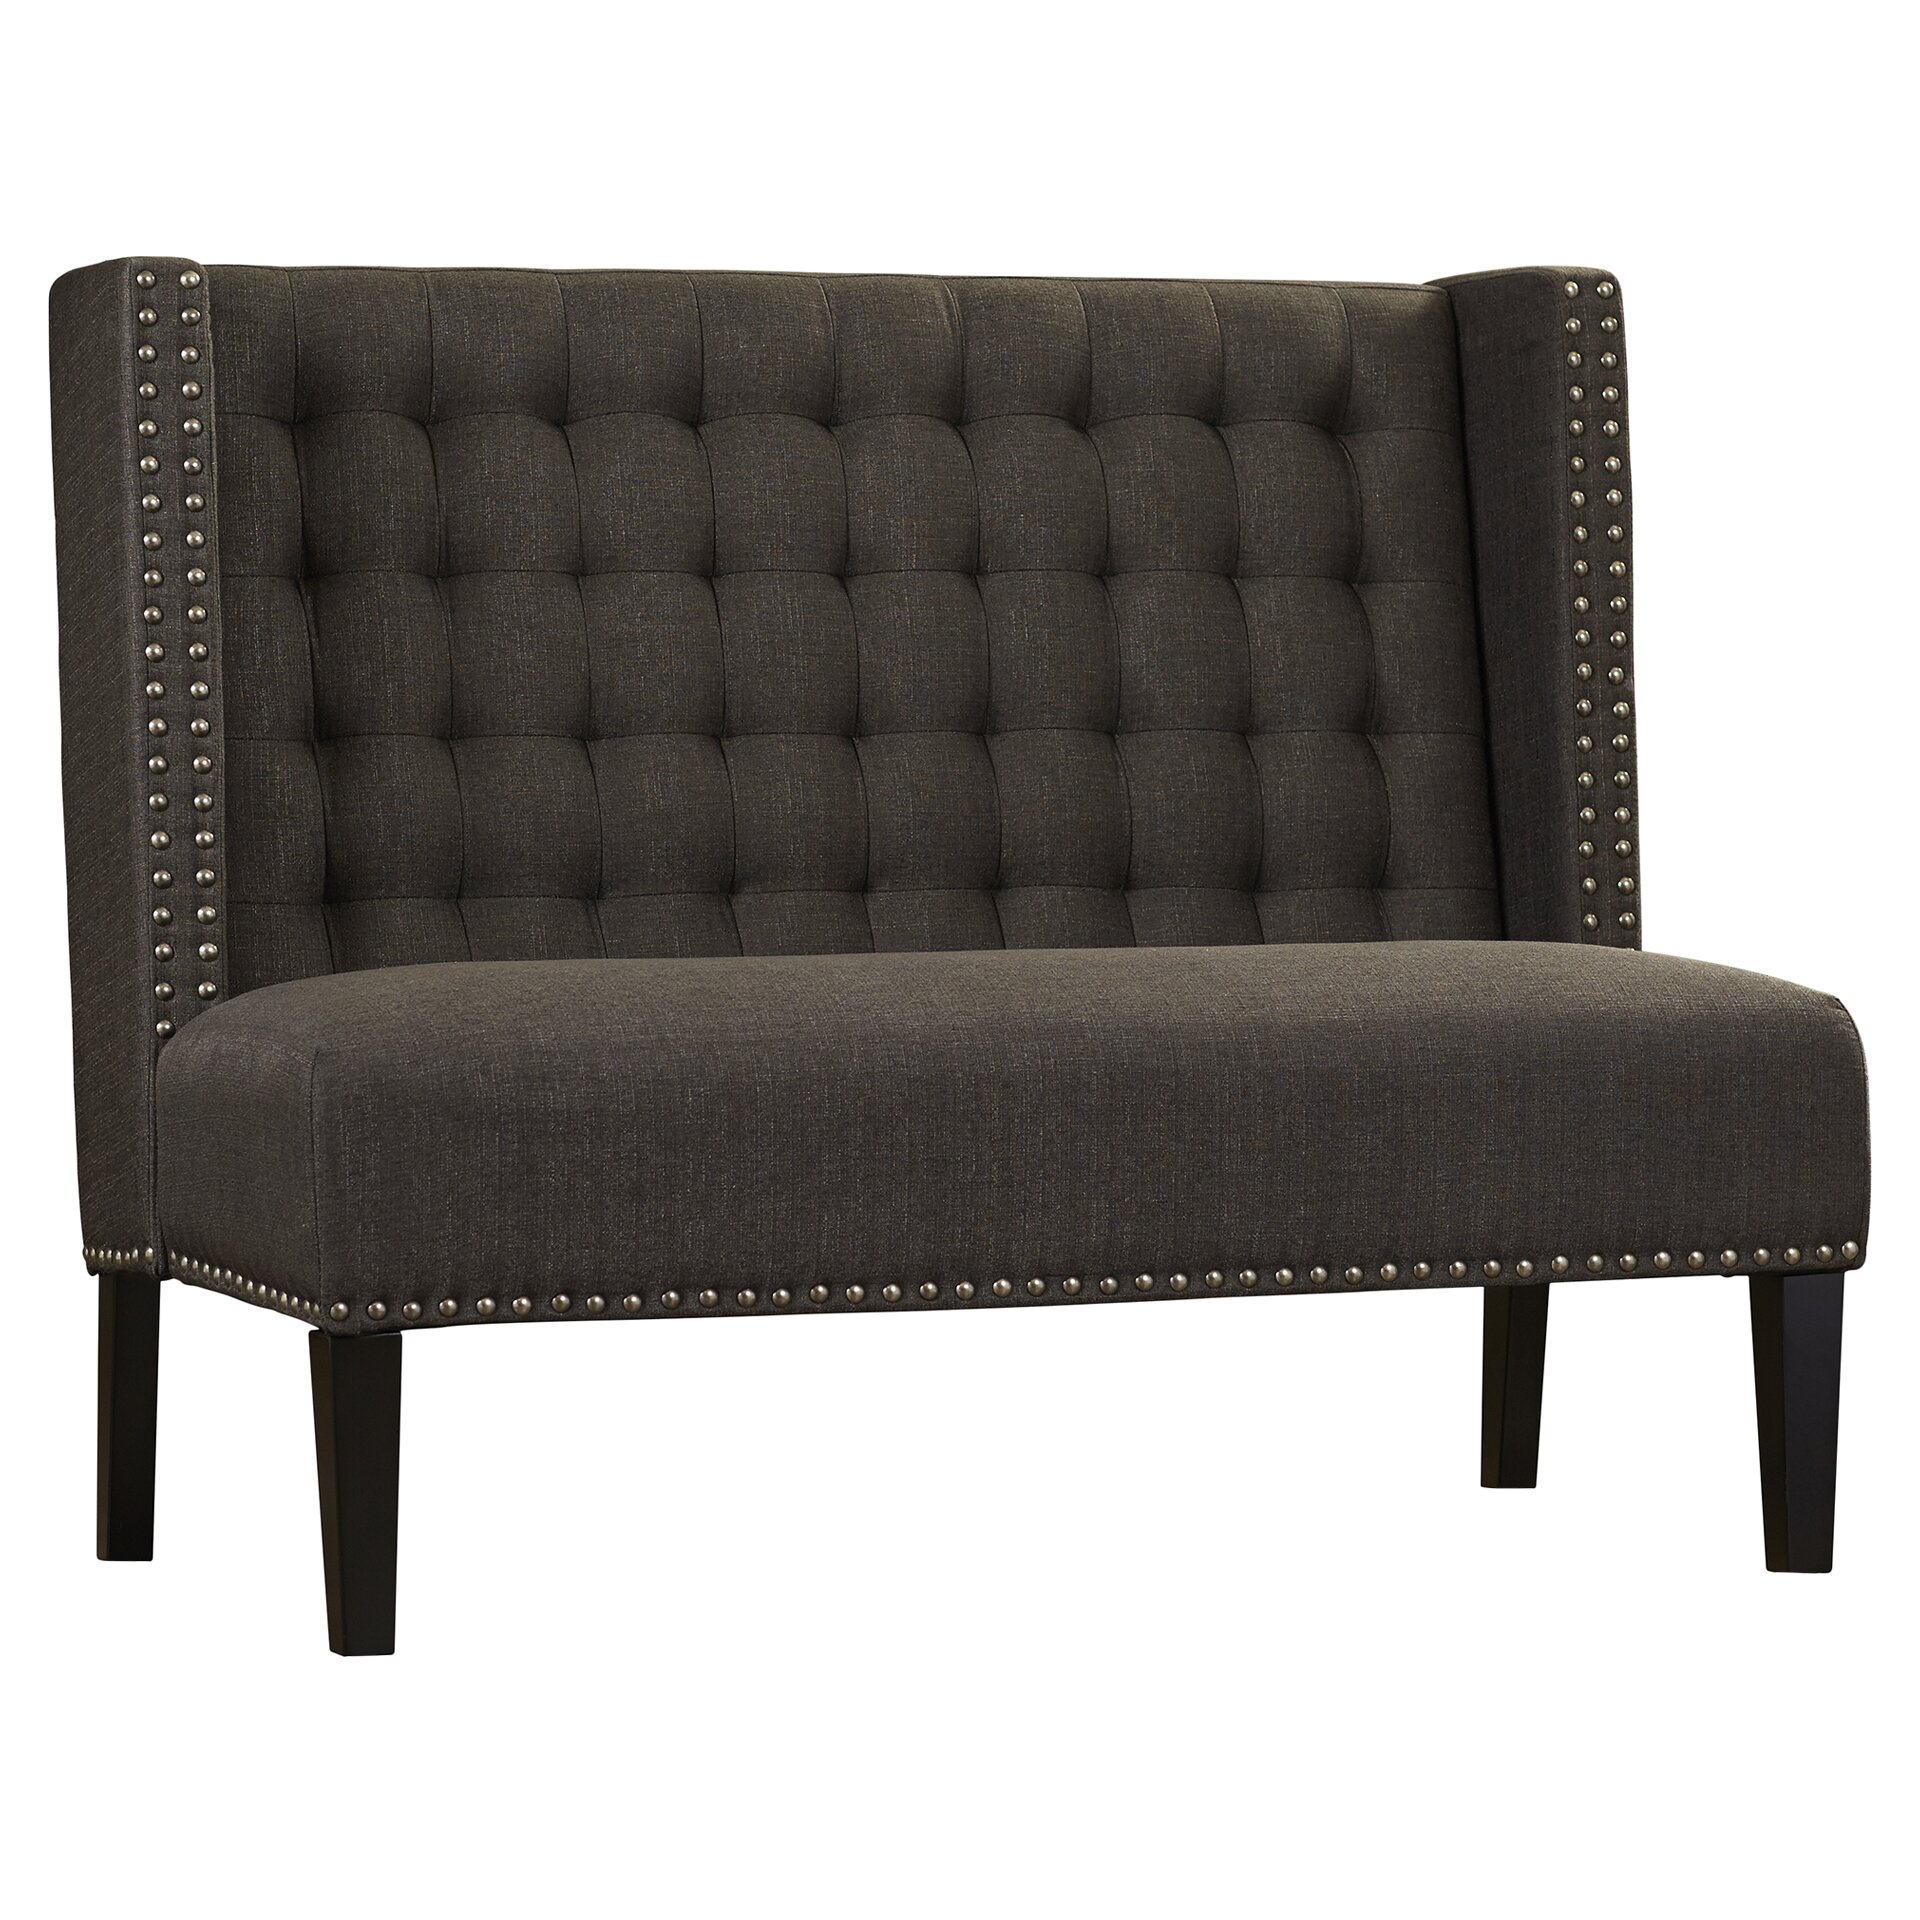 House of Hampton Aline Upholstered Banquette Bench in Charcoal \u0026 Reviews  Wayfair